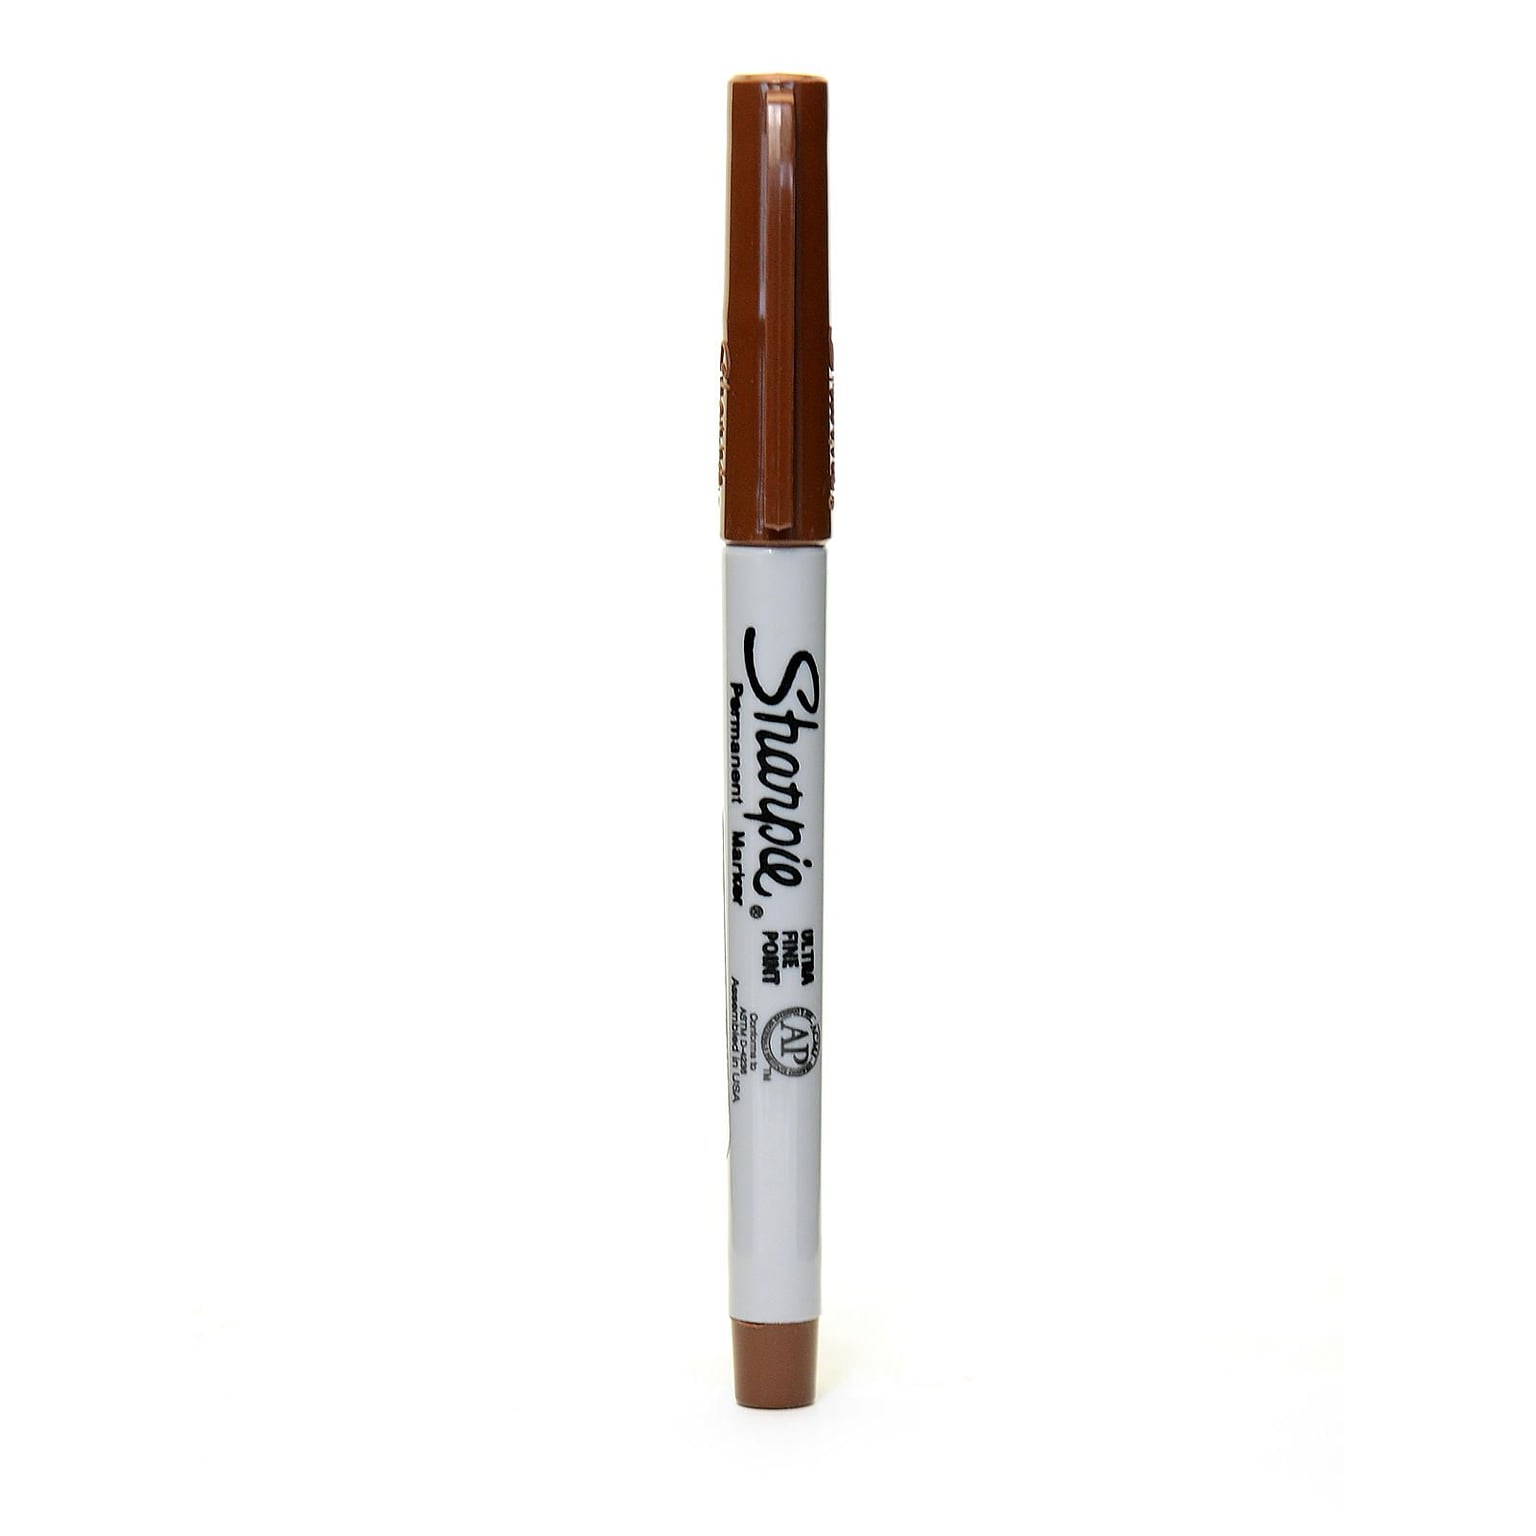 Sharpie Permanent Markers, Ultra Fine Tip, Brown, 24/Pack (75112-PK24)